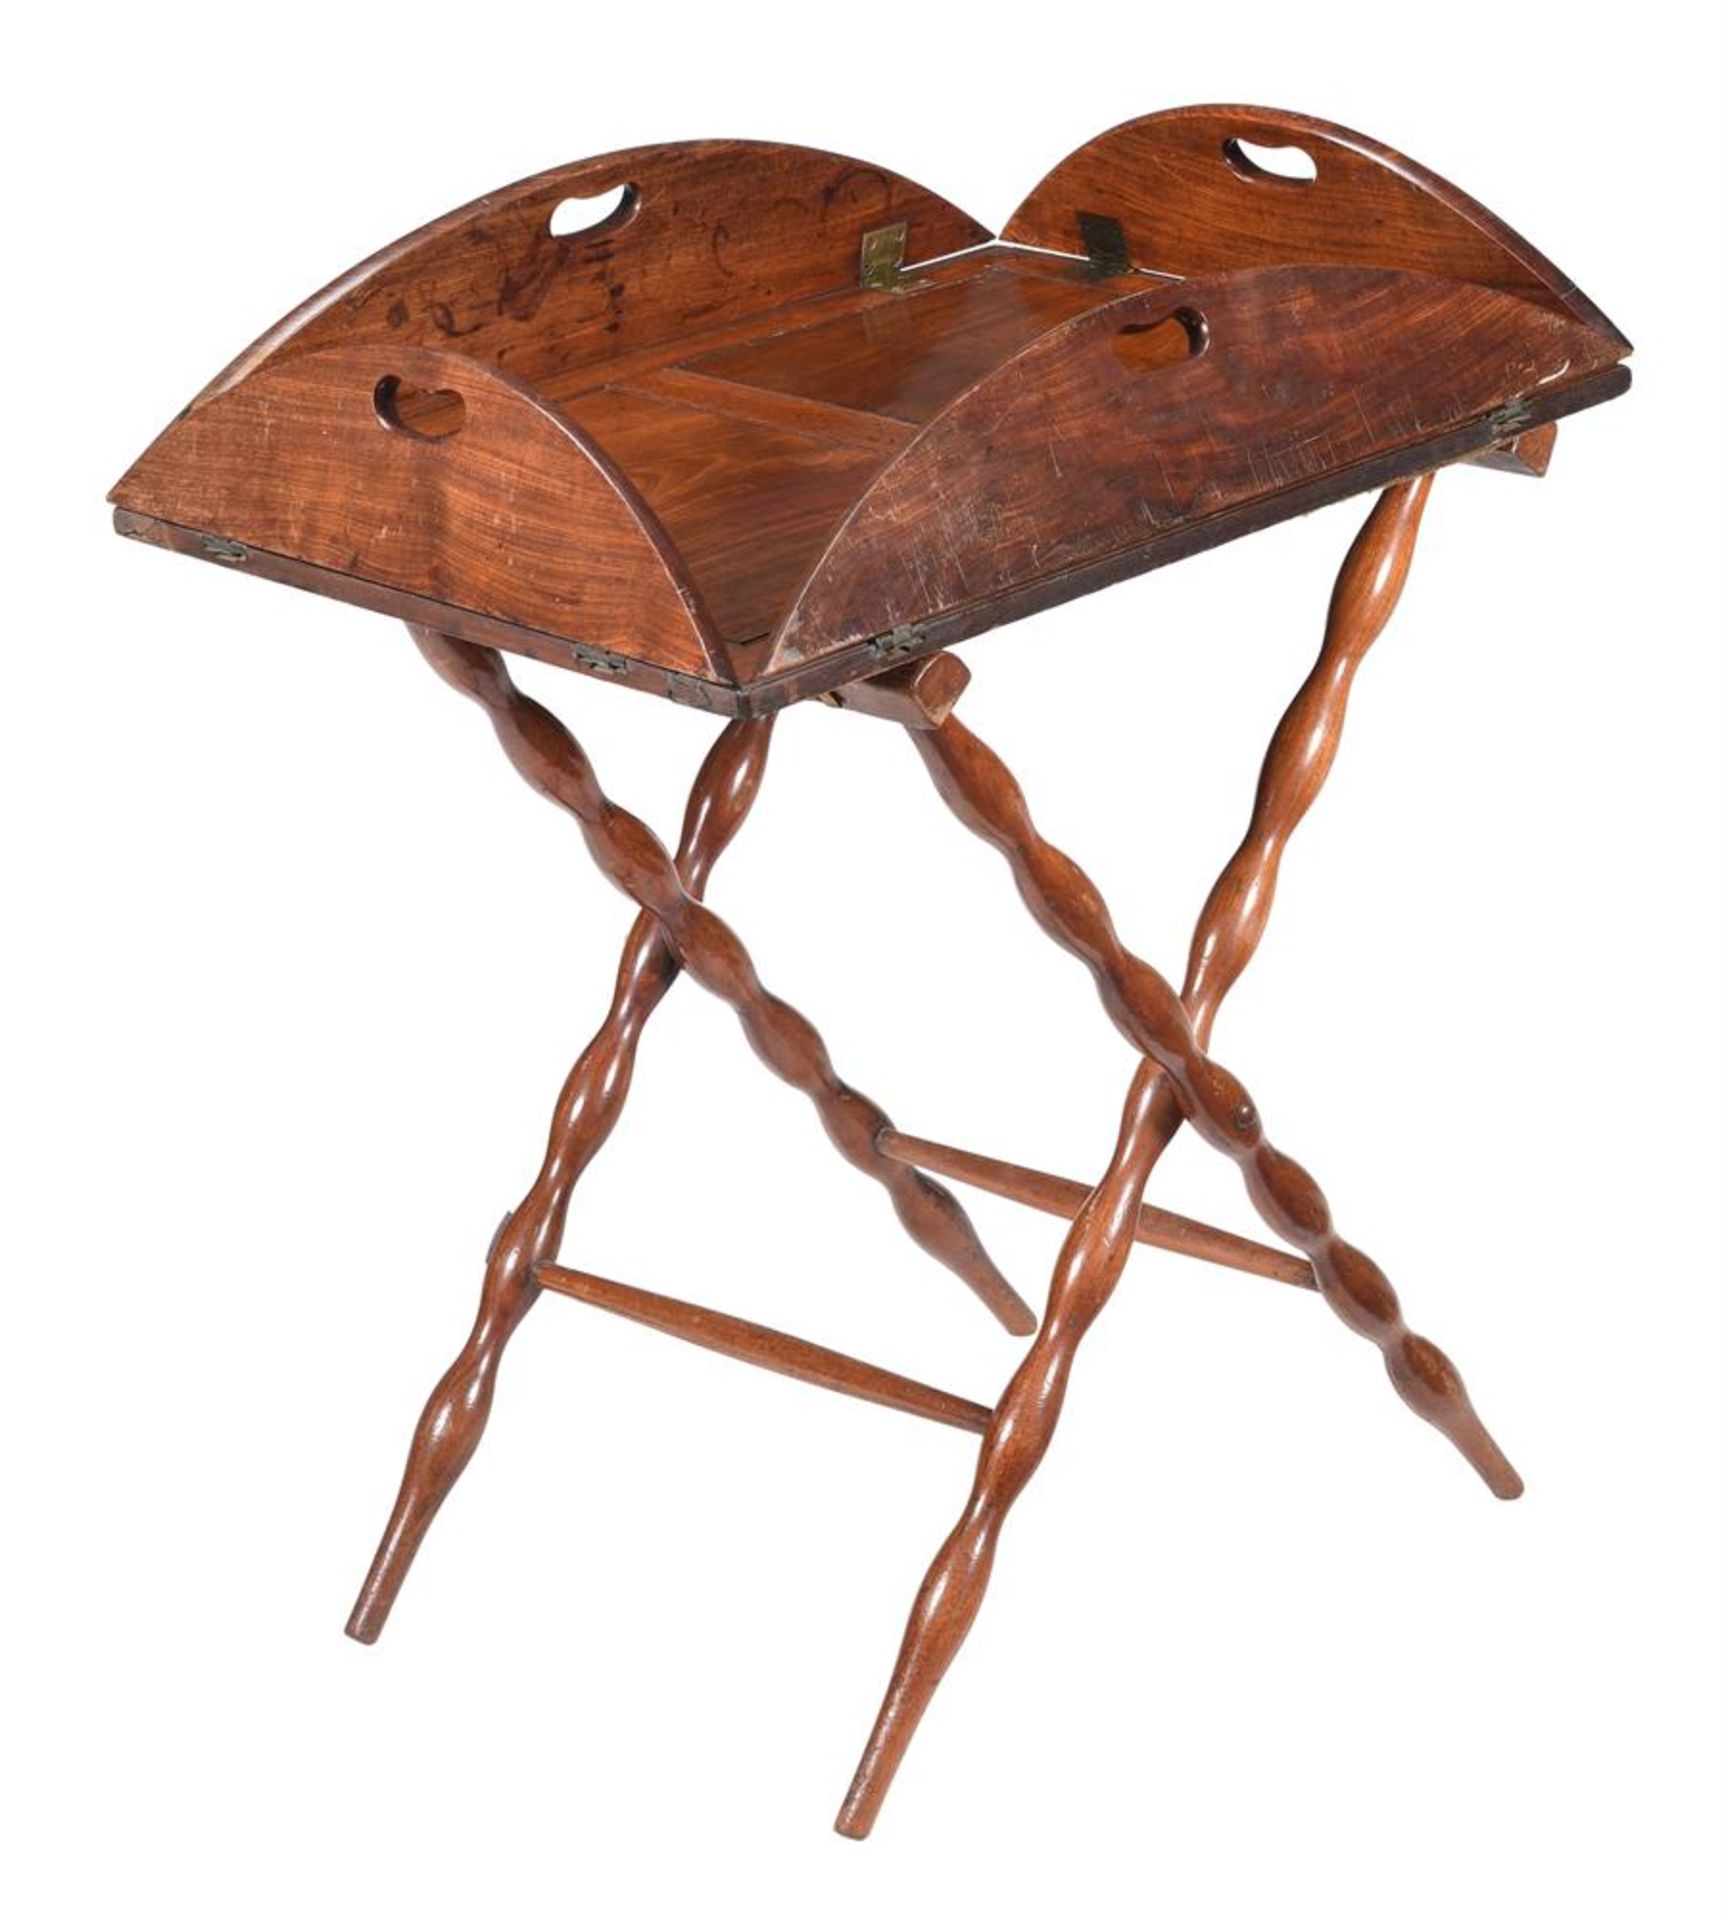 A MAHOGANY BUTLER'S TRAY ON STAND, THE TRAY LATE 18TH CENTURY - Image 2 of 3